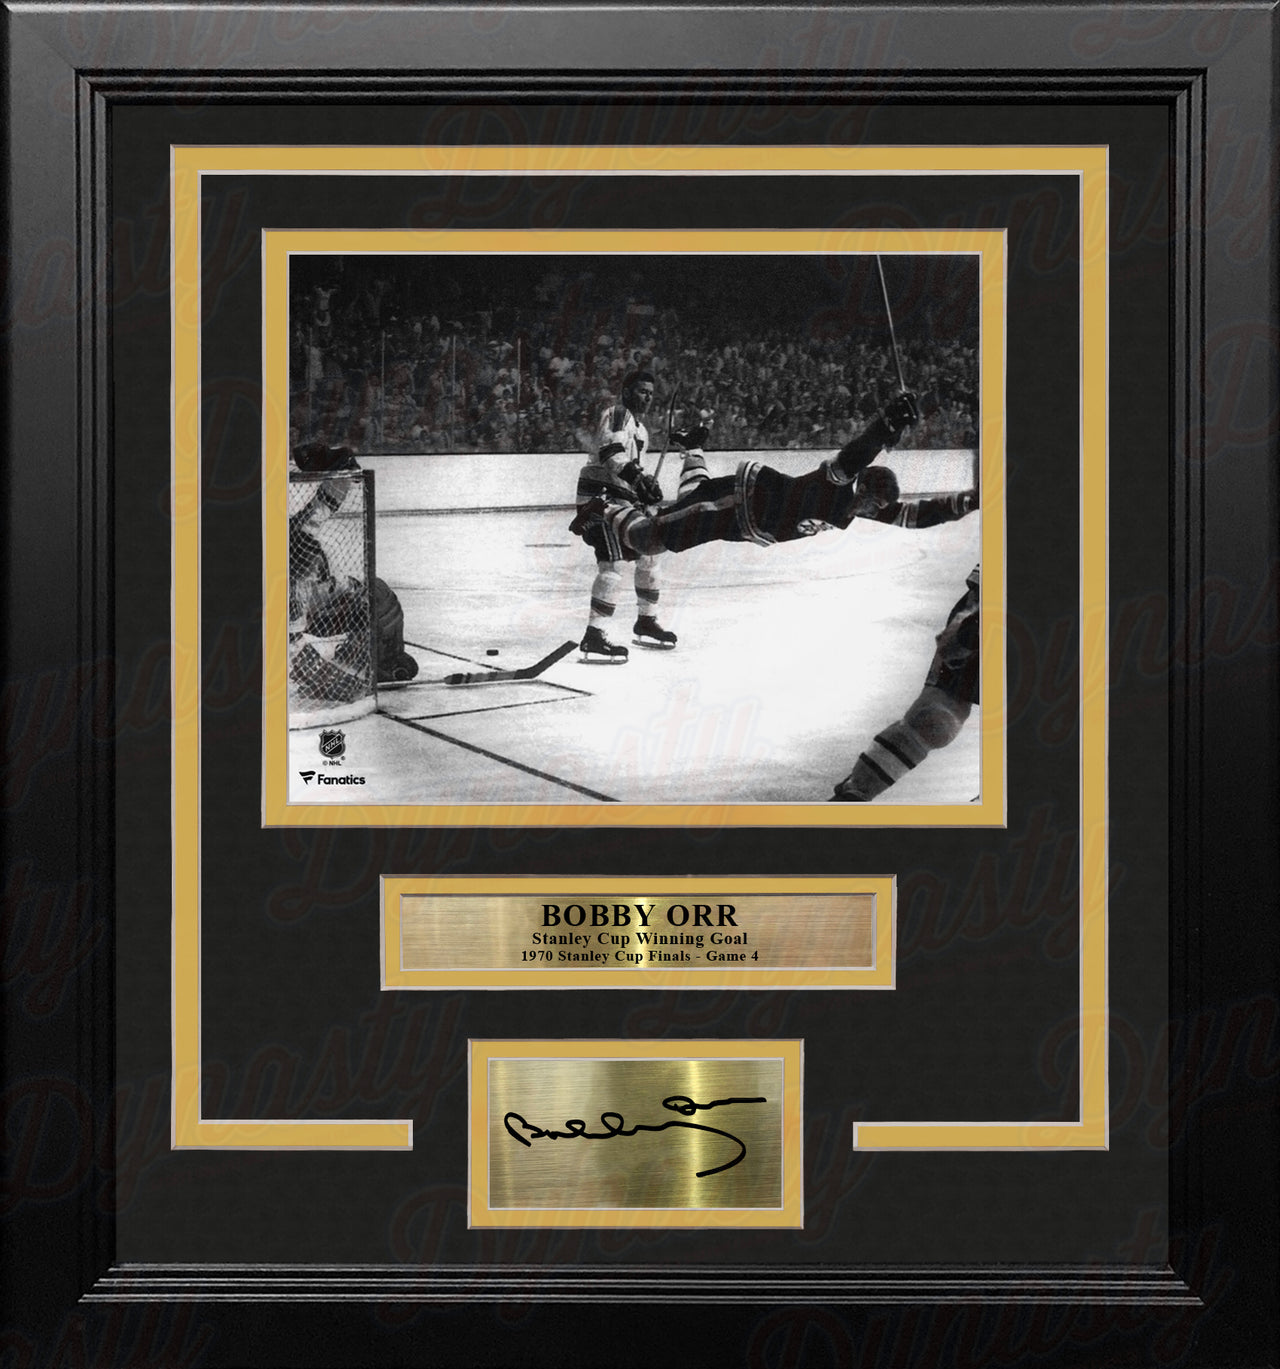 Bobby Orr Boston Bruins 1970 Stanley Cup Game-Winning Goal 8x10 Framed Photo with Engraved Autograph - Dynasty Sports & Framing 